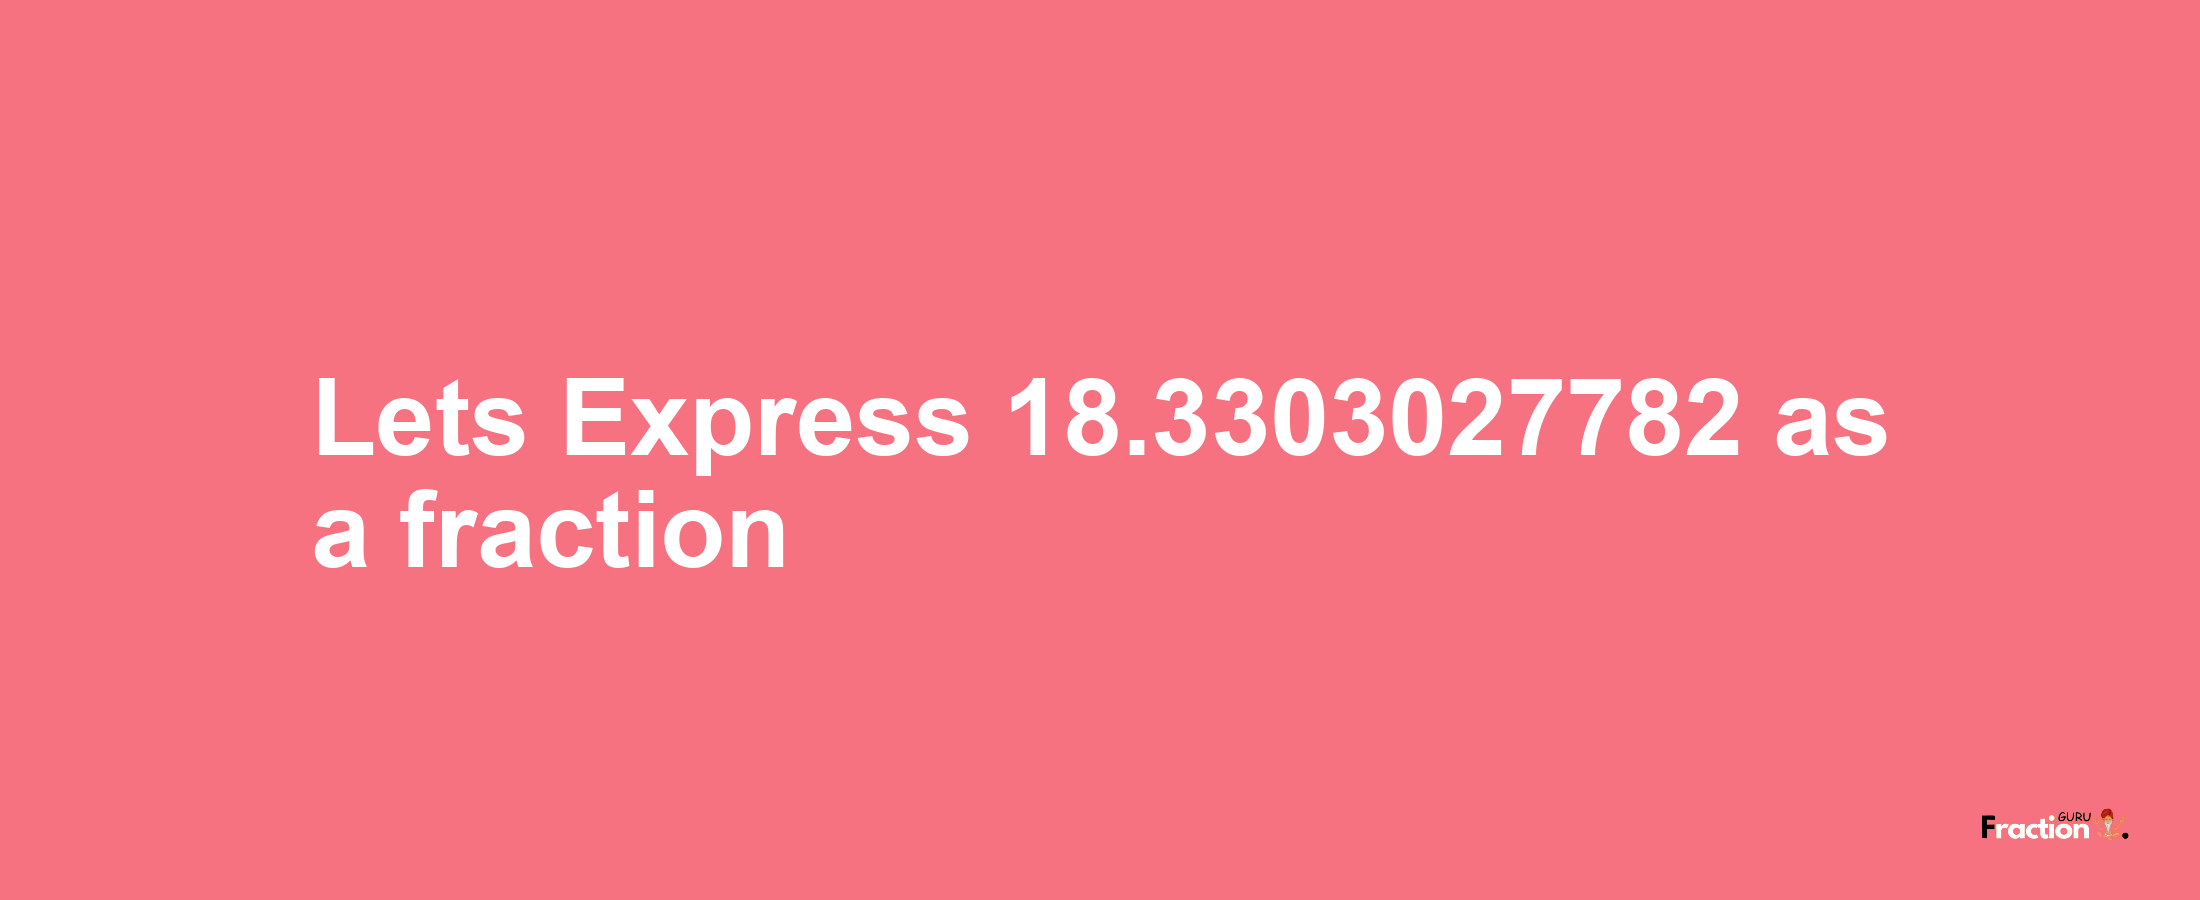 Lets Express 18.3303027782 as afraction